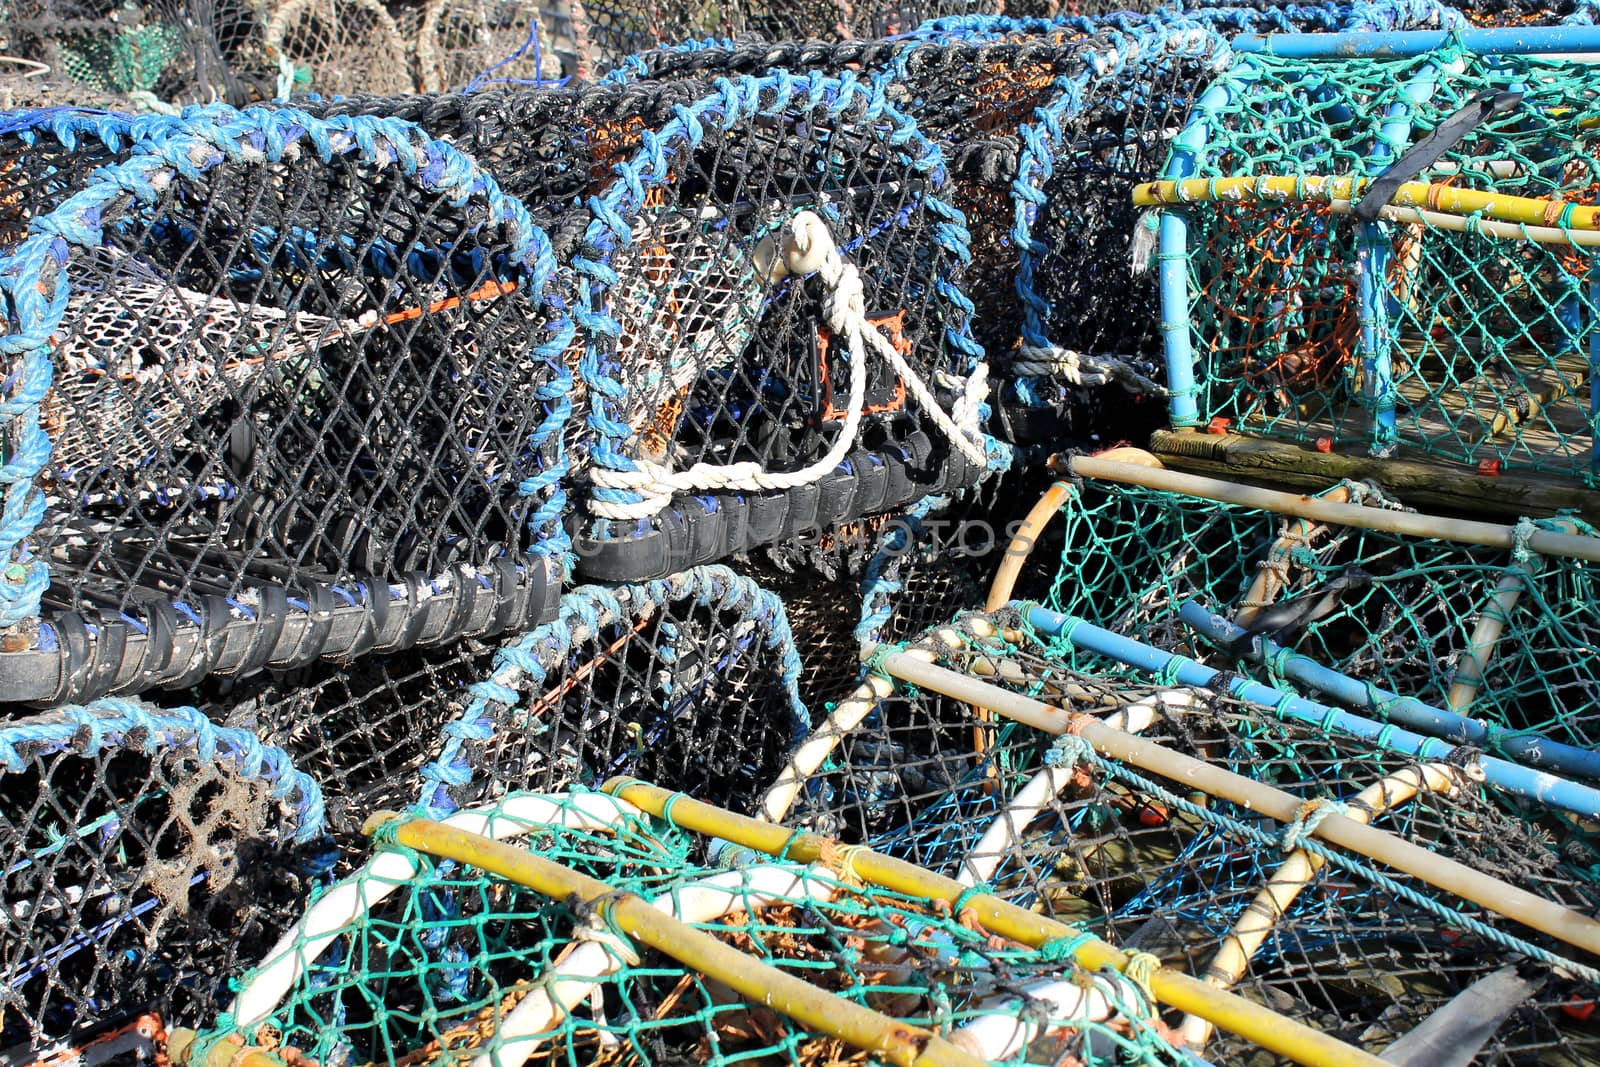 Stack of lobster pots and creels in Scarborough harbor.